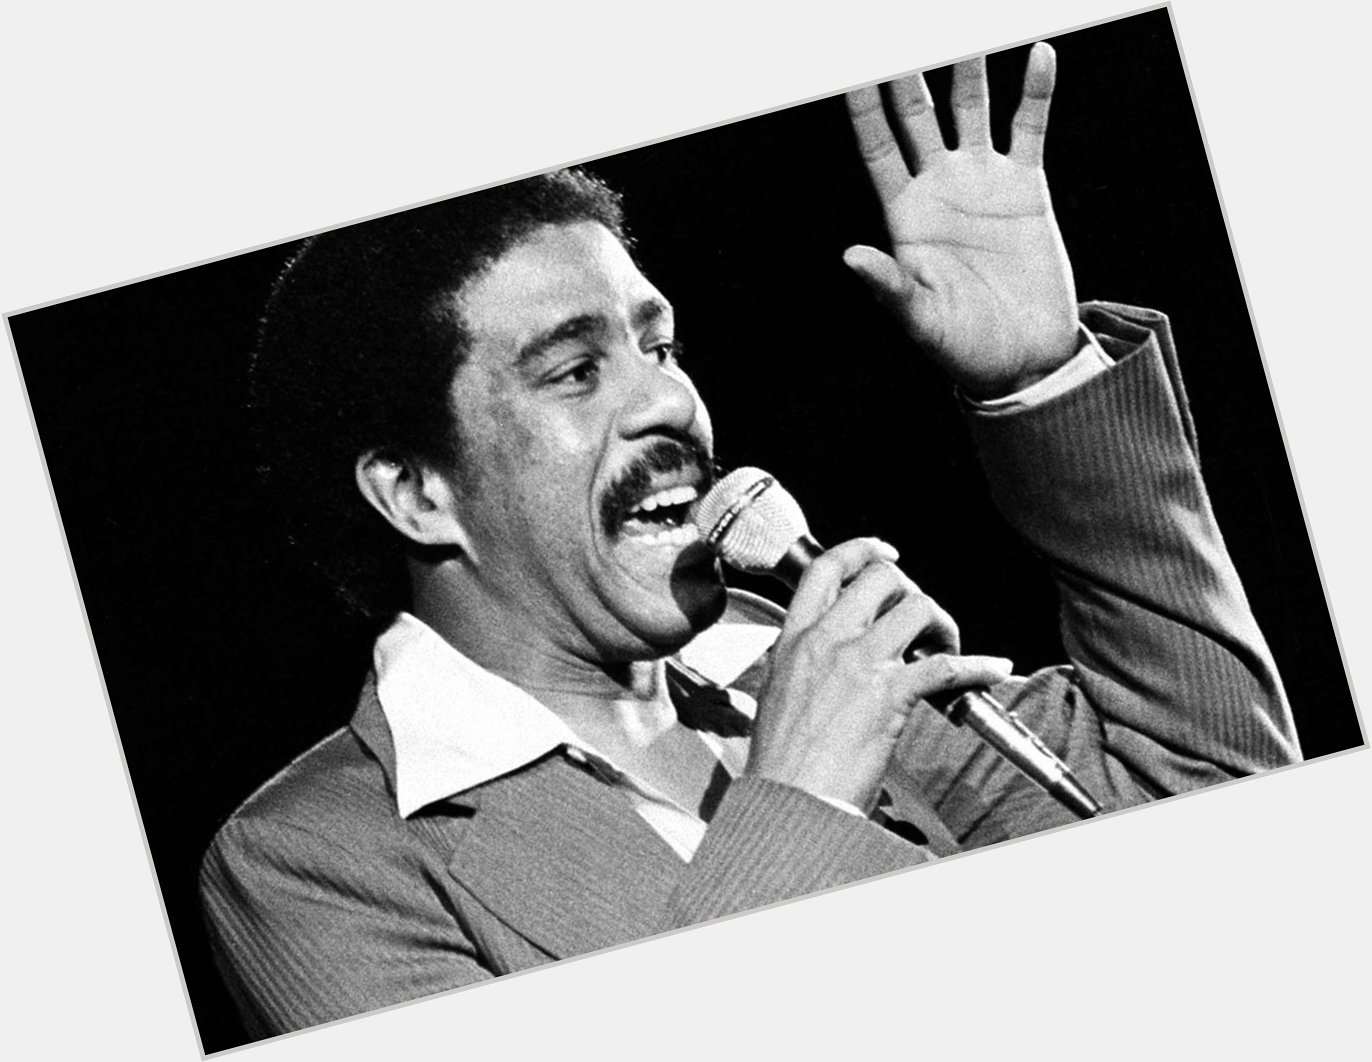 Happy birthday (RIP) to one of the all-time great stand-up comedians, Emmy/Grammy winner Richard Pryor! 